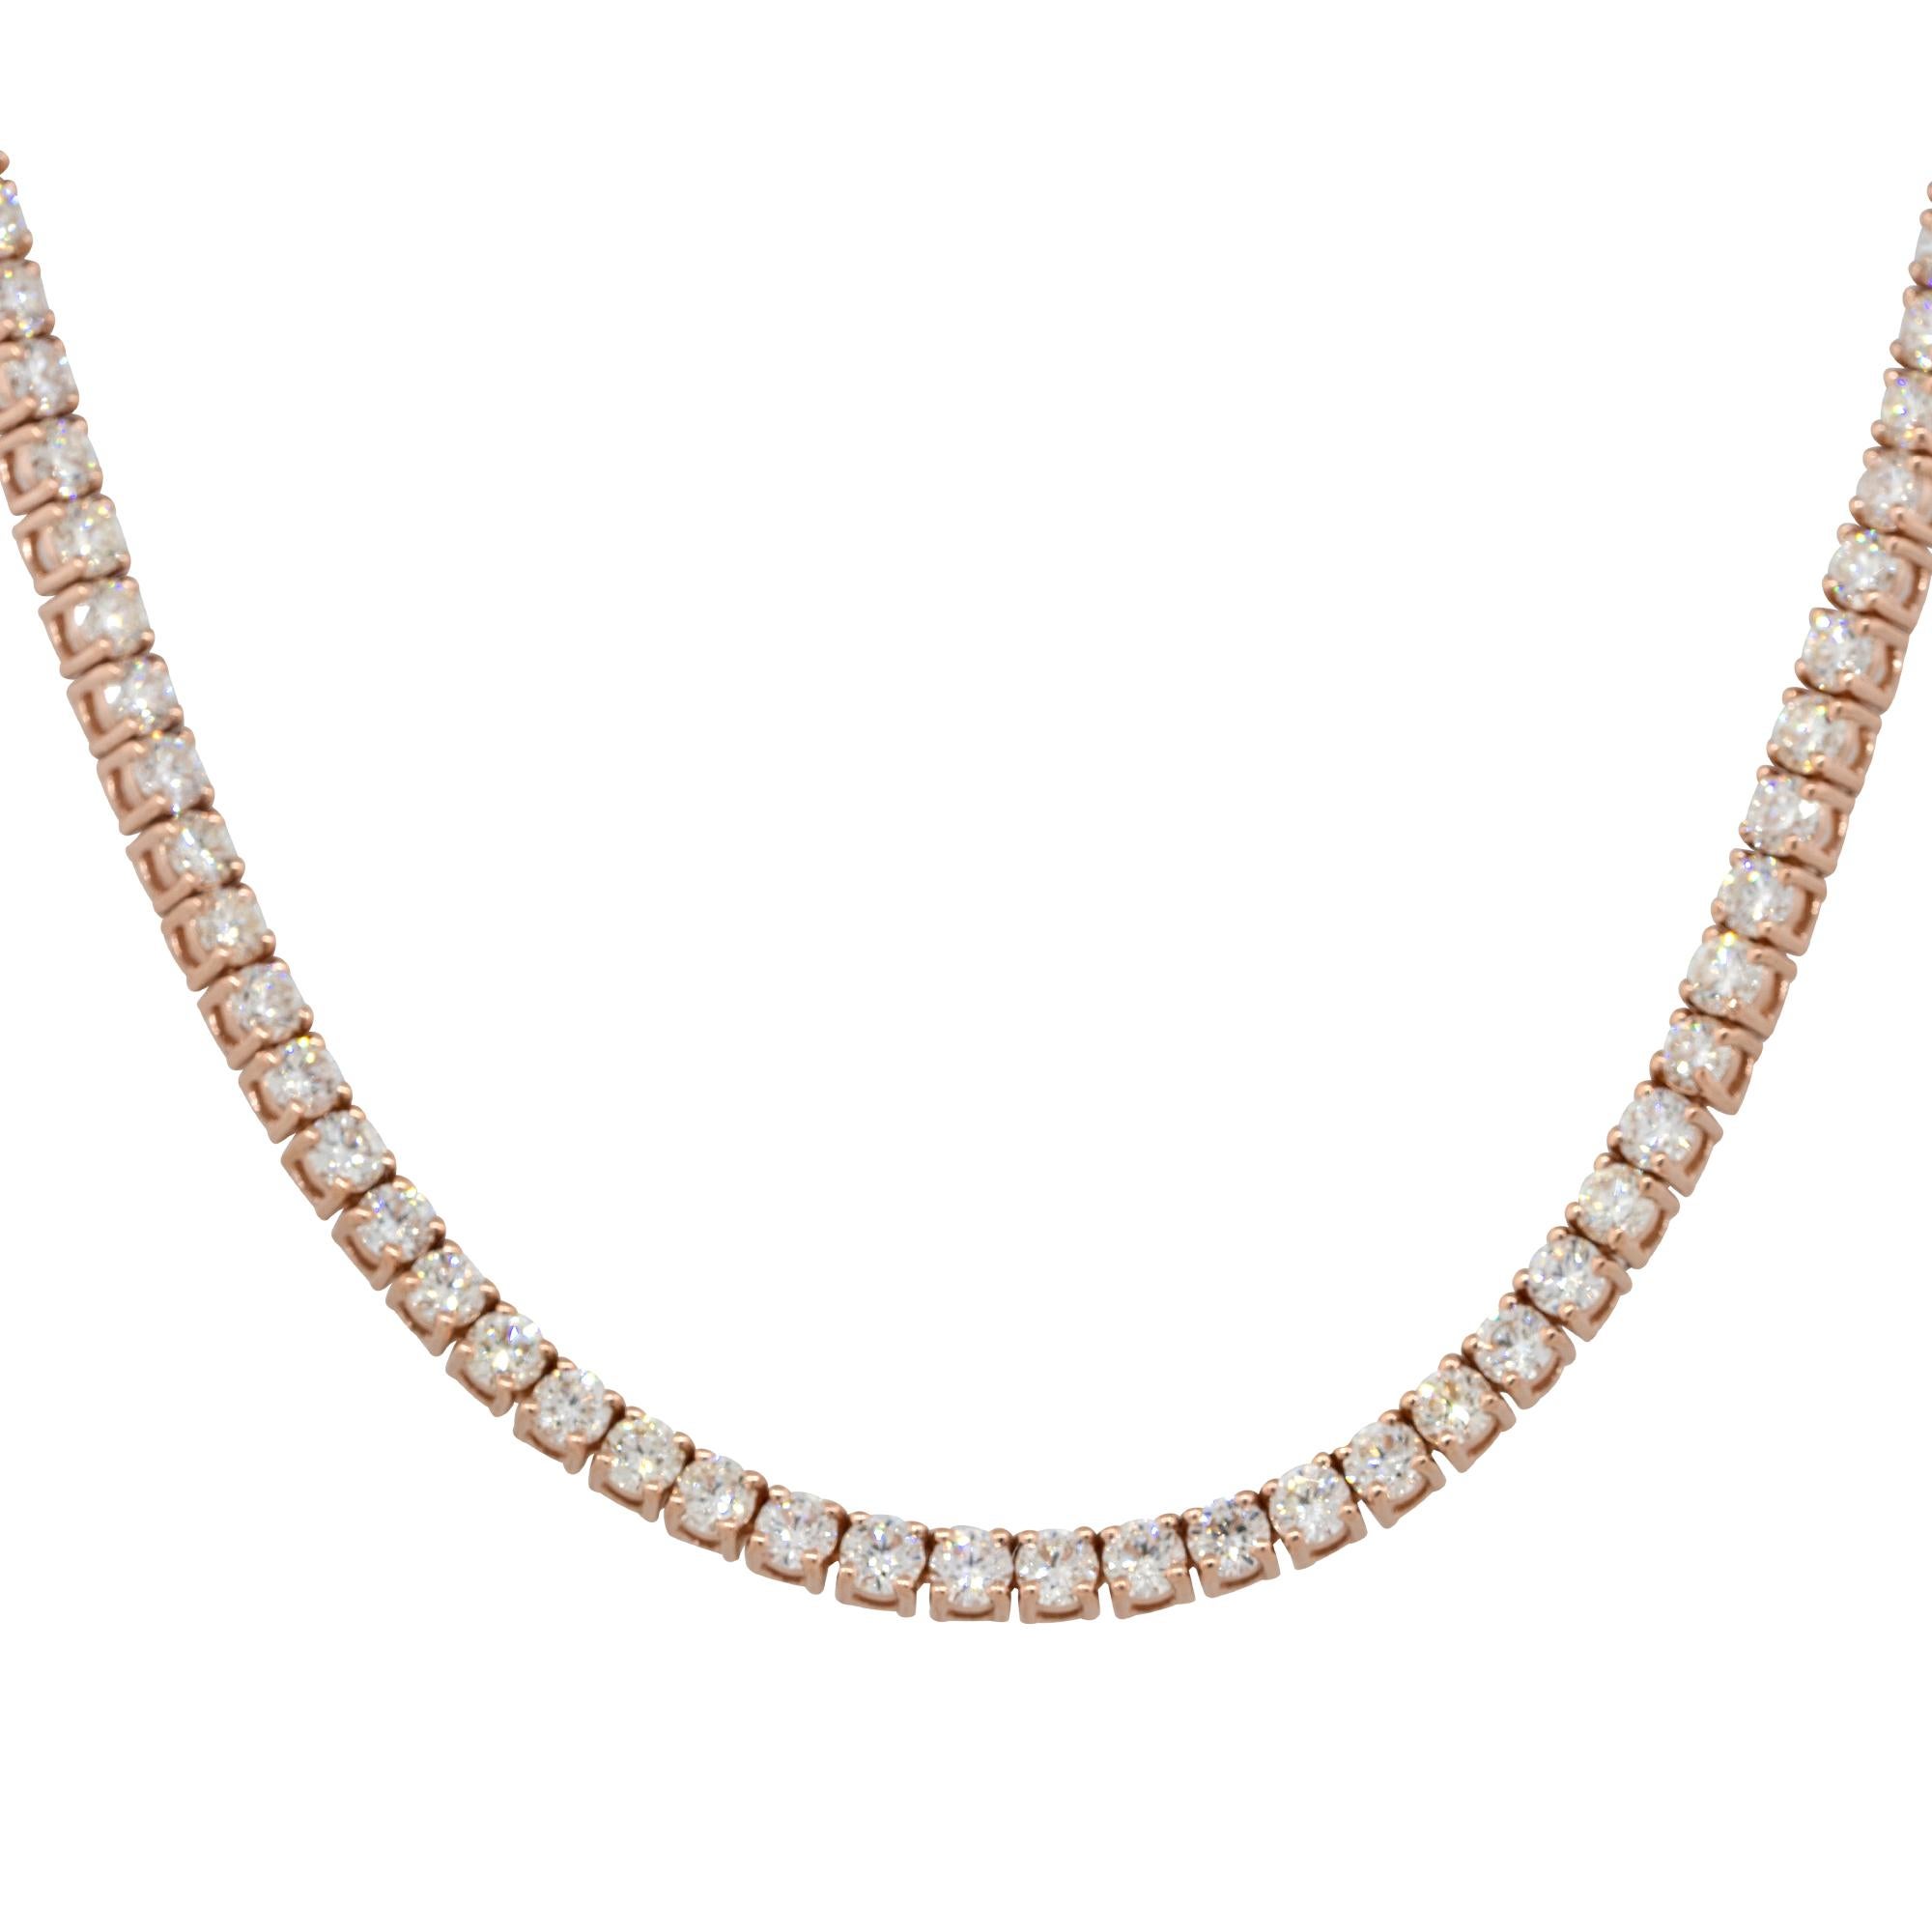 Material: 14k Rose Gold
Diamond Details: Approx. 6.62ctw of round cut Diamonds. Diamonds are G/H in color and VS in clarity
Clasps: Tongue in box with safety clasp
Total Weight: 16.7g (10.7dwt)
Length: 18